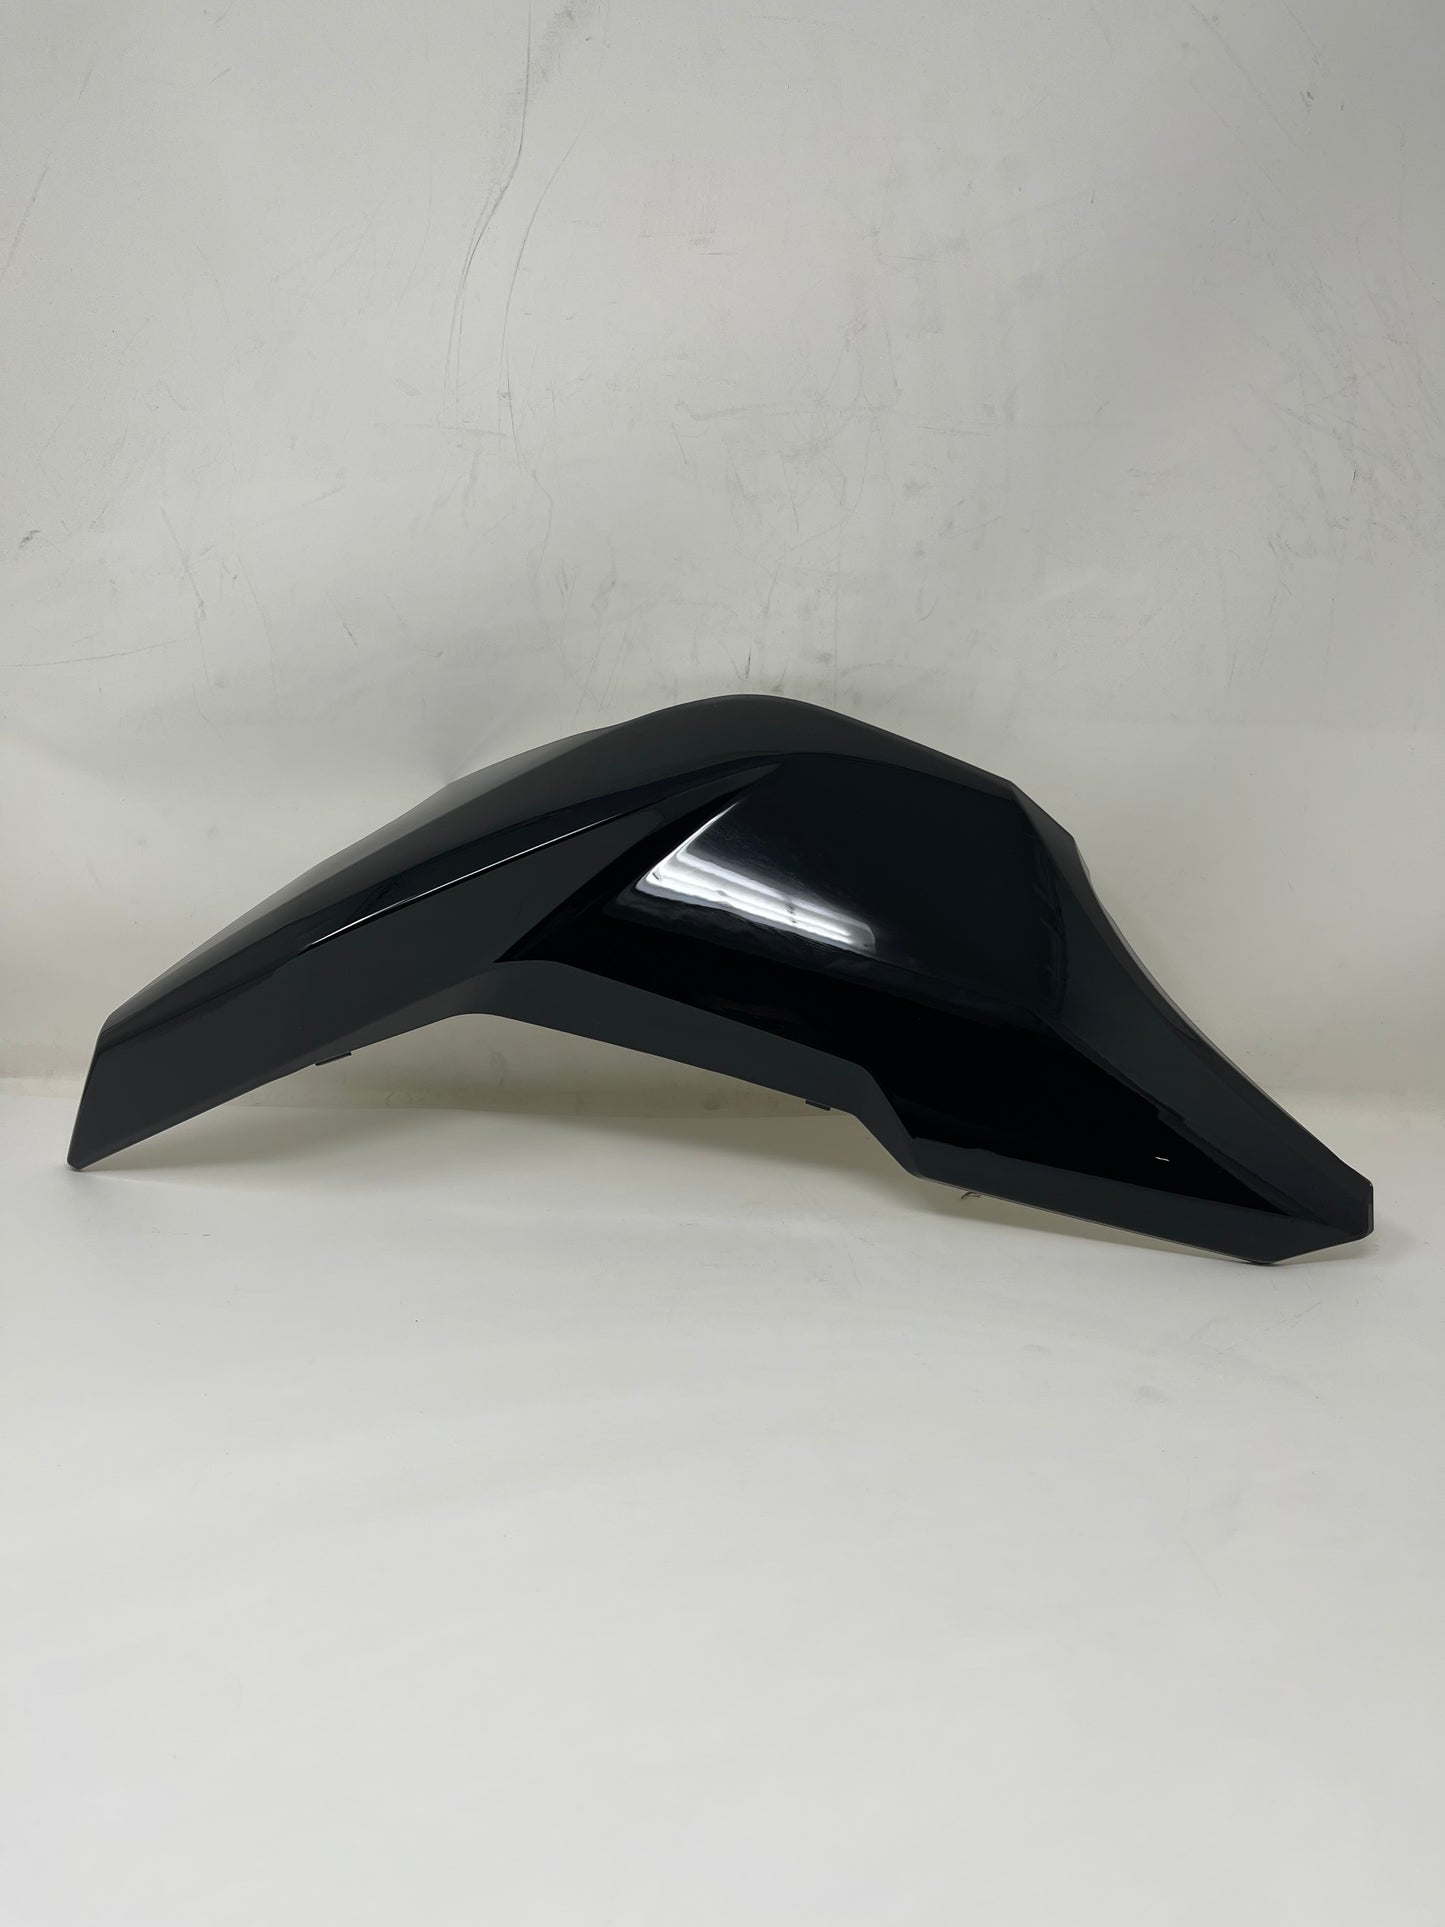 Left fuel tank cover for BD125-10 in black. Part #125010009